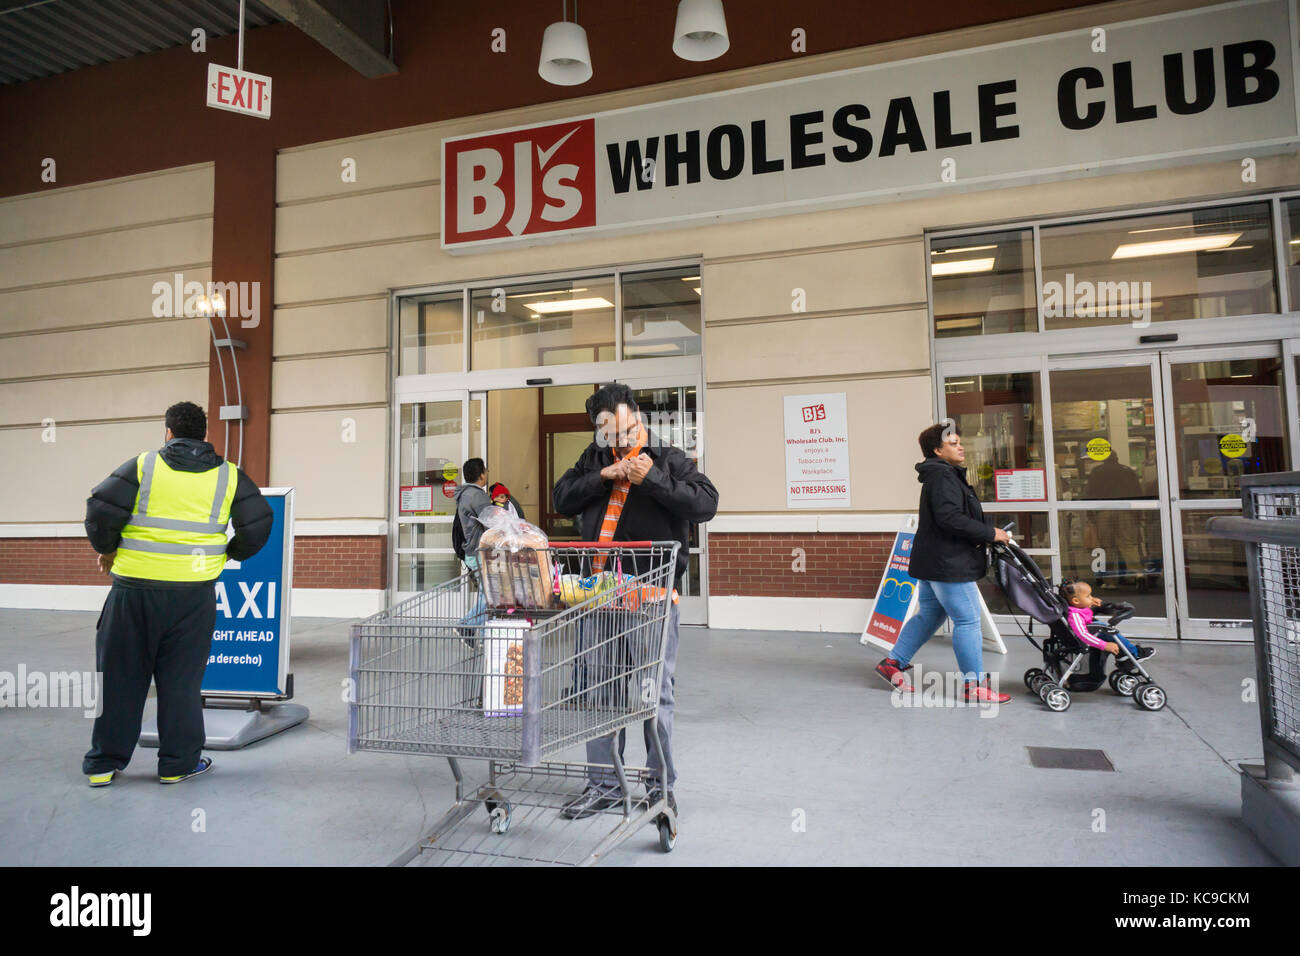 https://c8.alamy.com/comp/KC9CKM/shoppers-at-a-bjs-wholesale-club-in-a-mall-in-the-bronx-in-new-york-KC9CKM.jpg